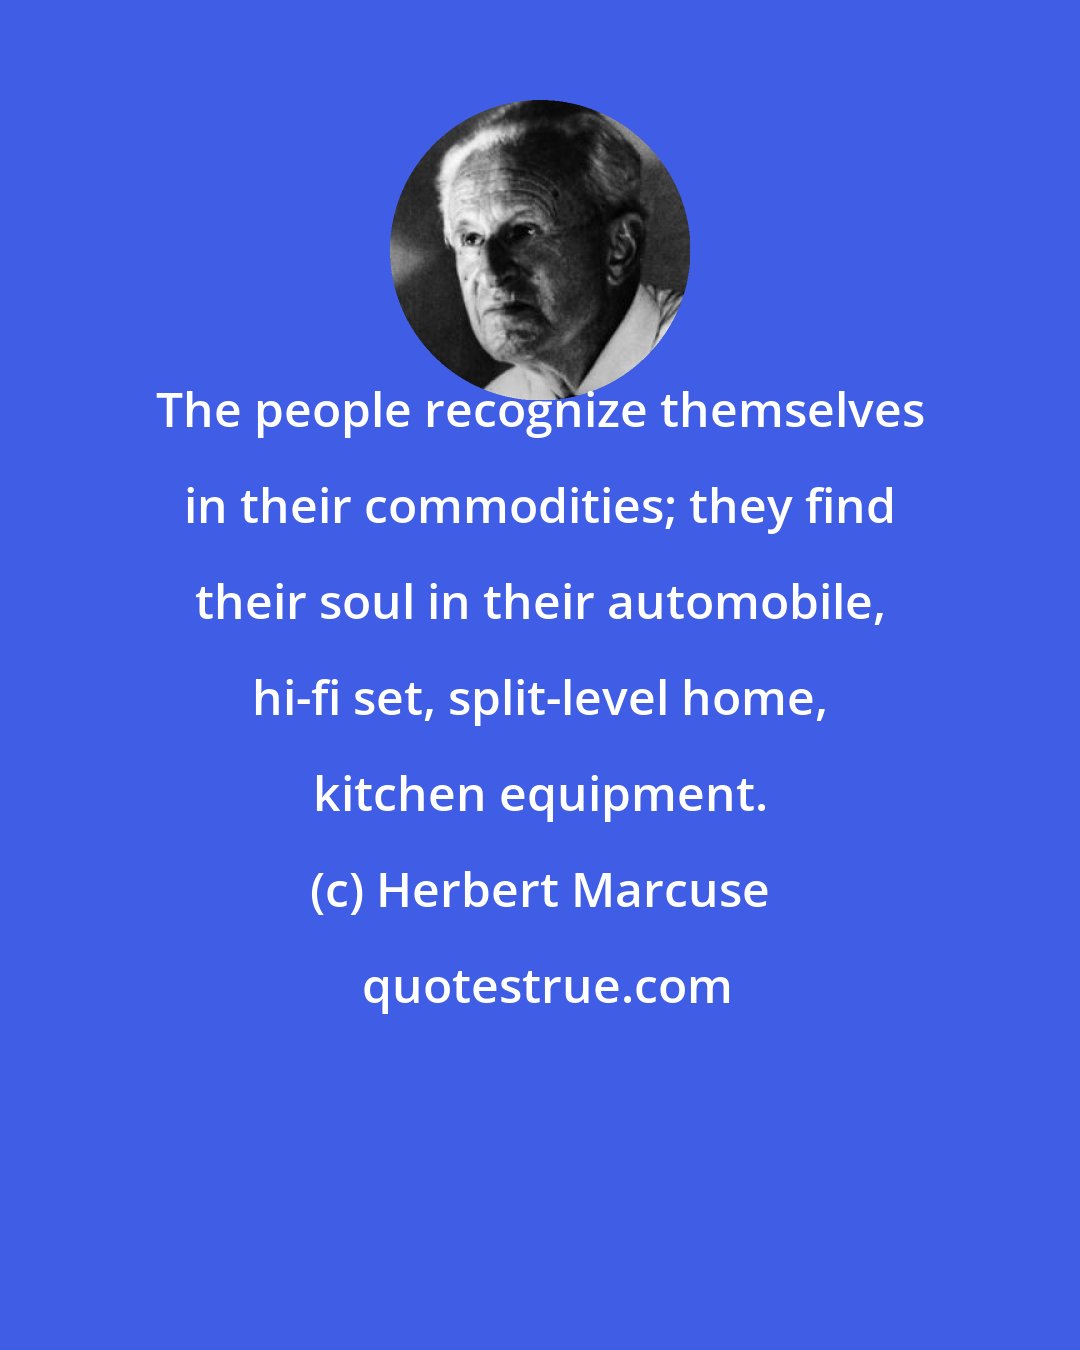 Herbert Marcuse: The people recognize themselves in their commodities; they find their soul in their automobile, hi-fi set, split-level home, kitchen equipment.